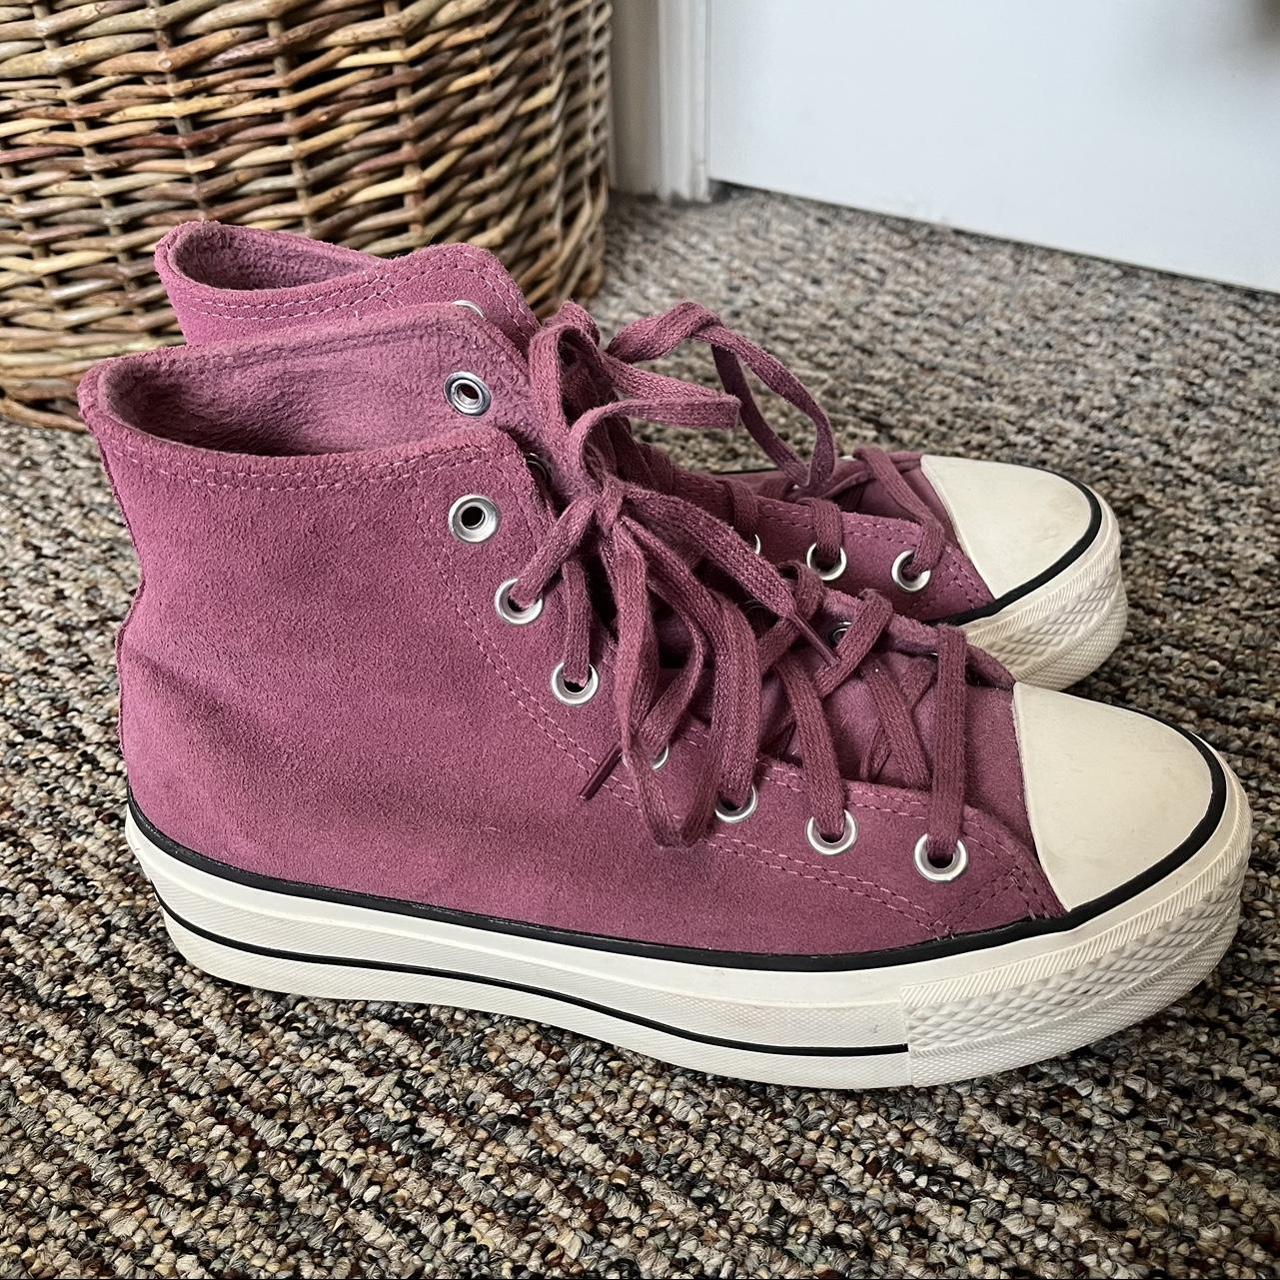 Converse Women's Pink and Burgundy Trainers | Depop